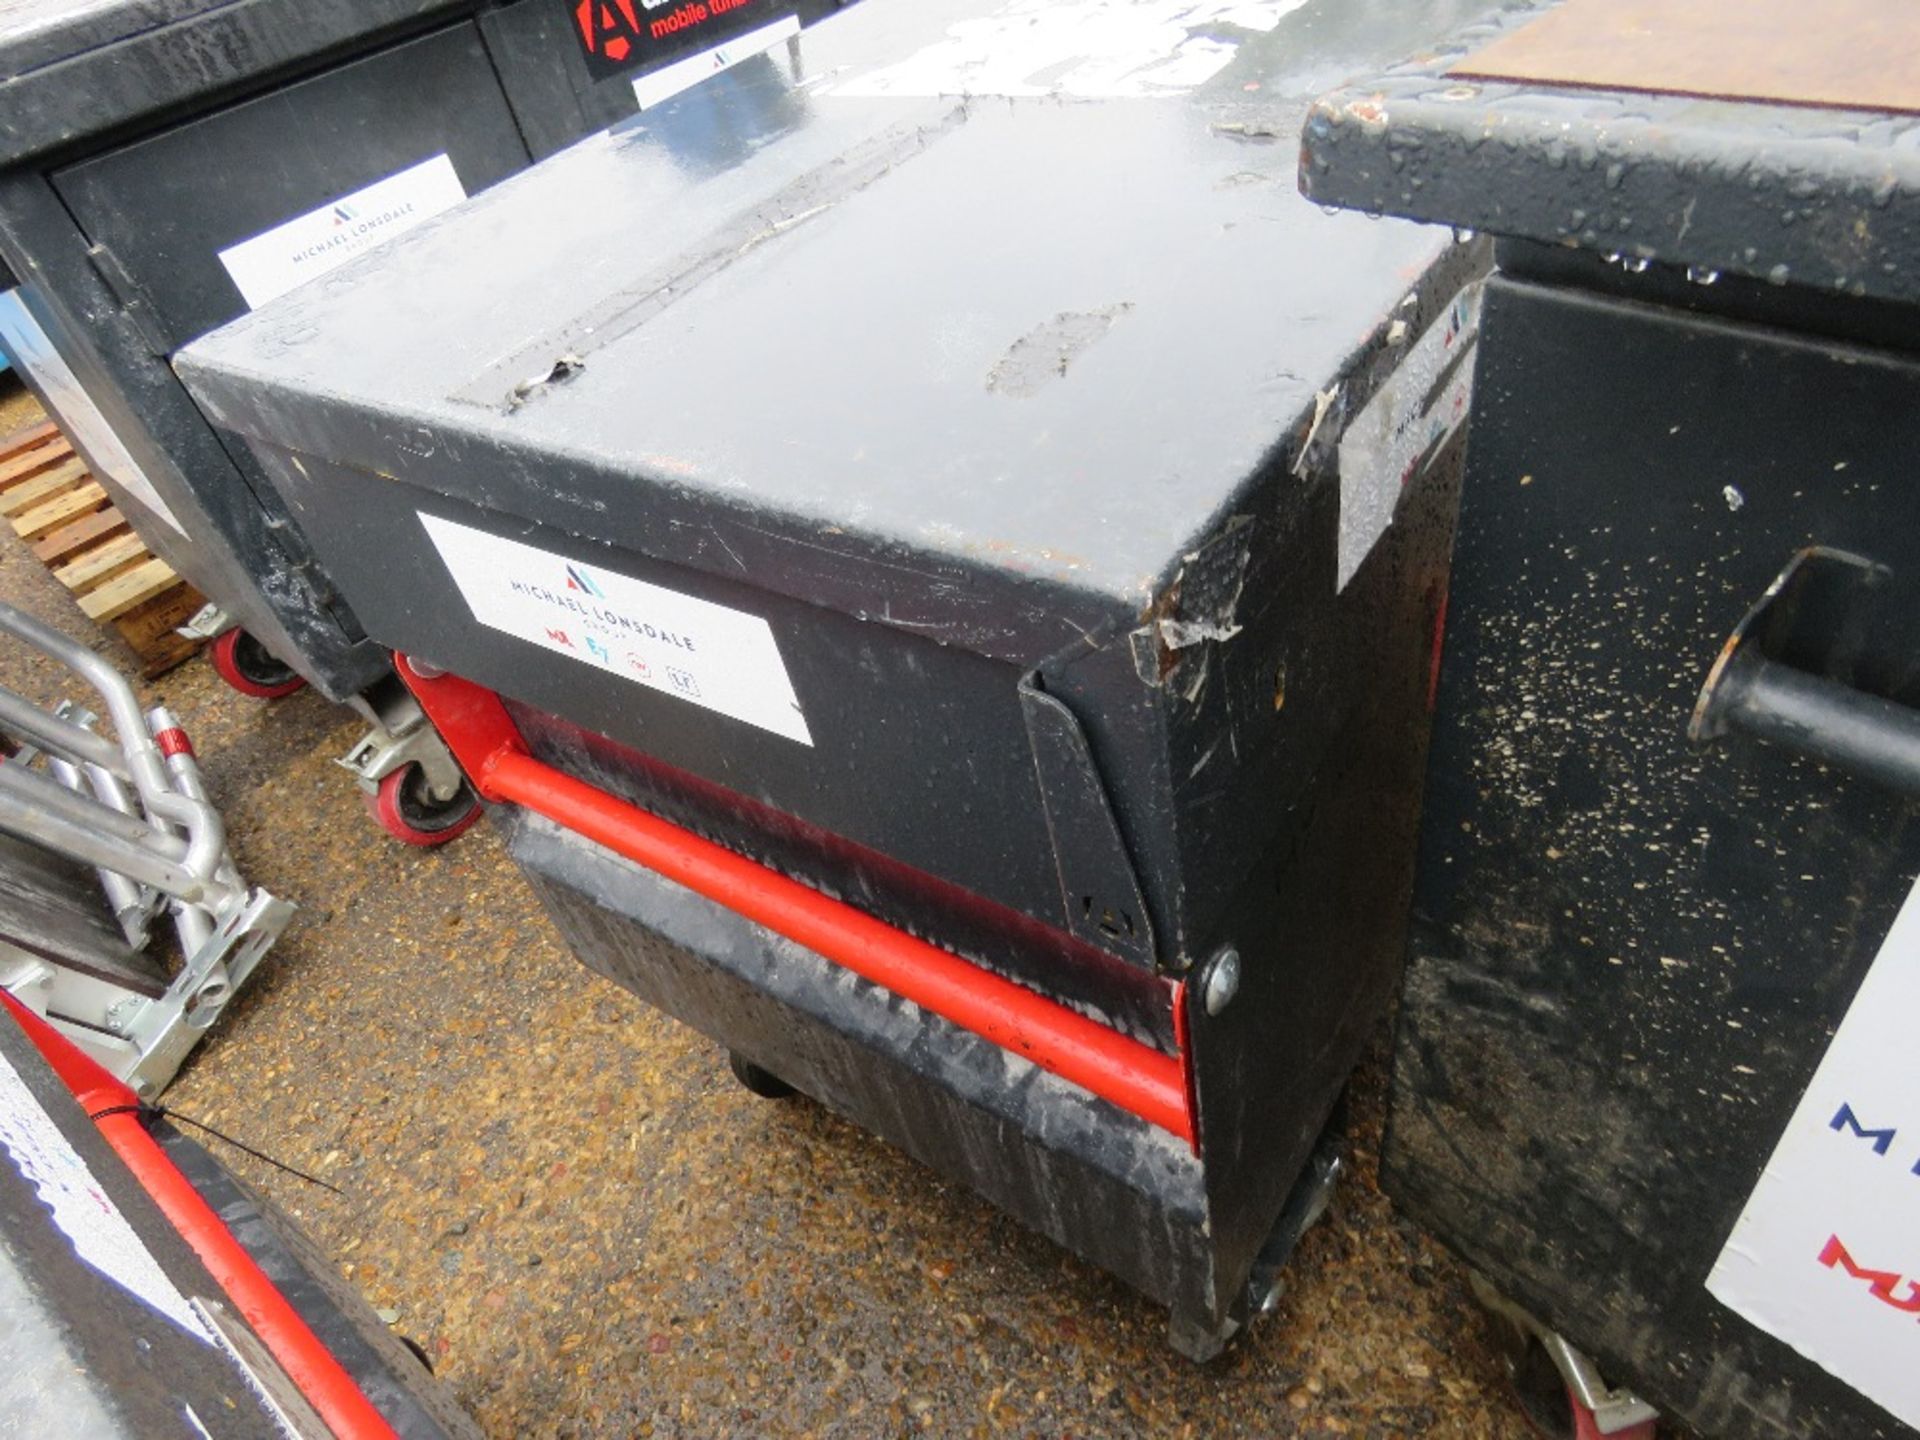 ARMORGARD TUFFBANK BOX . HAS KEYS. SOURCED FROM LARGE CONSTRUCTION COMPANY LIQUIDATION. - Image 3 of 5